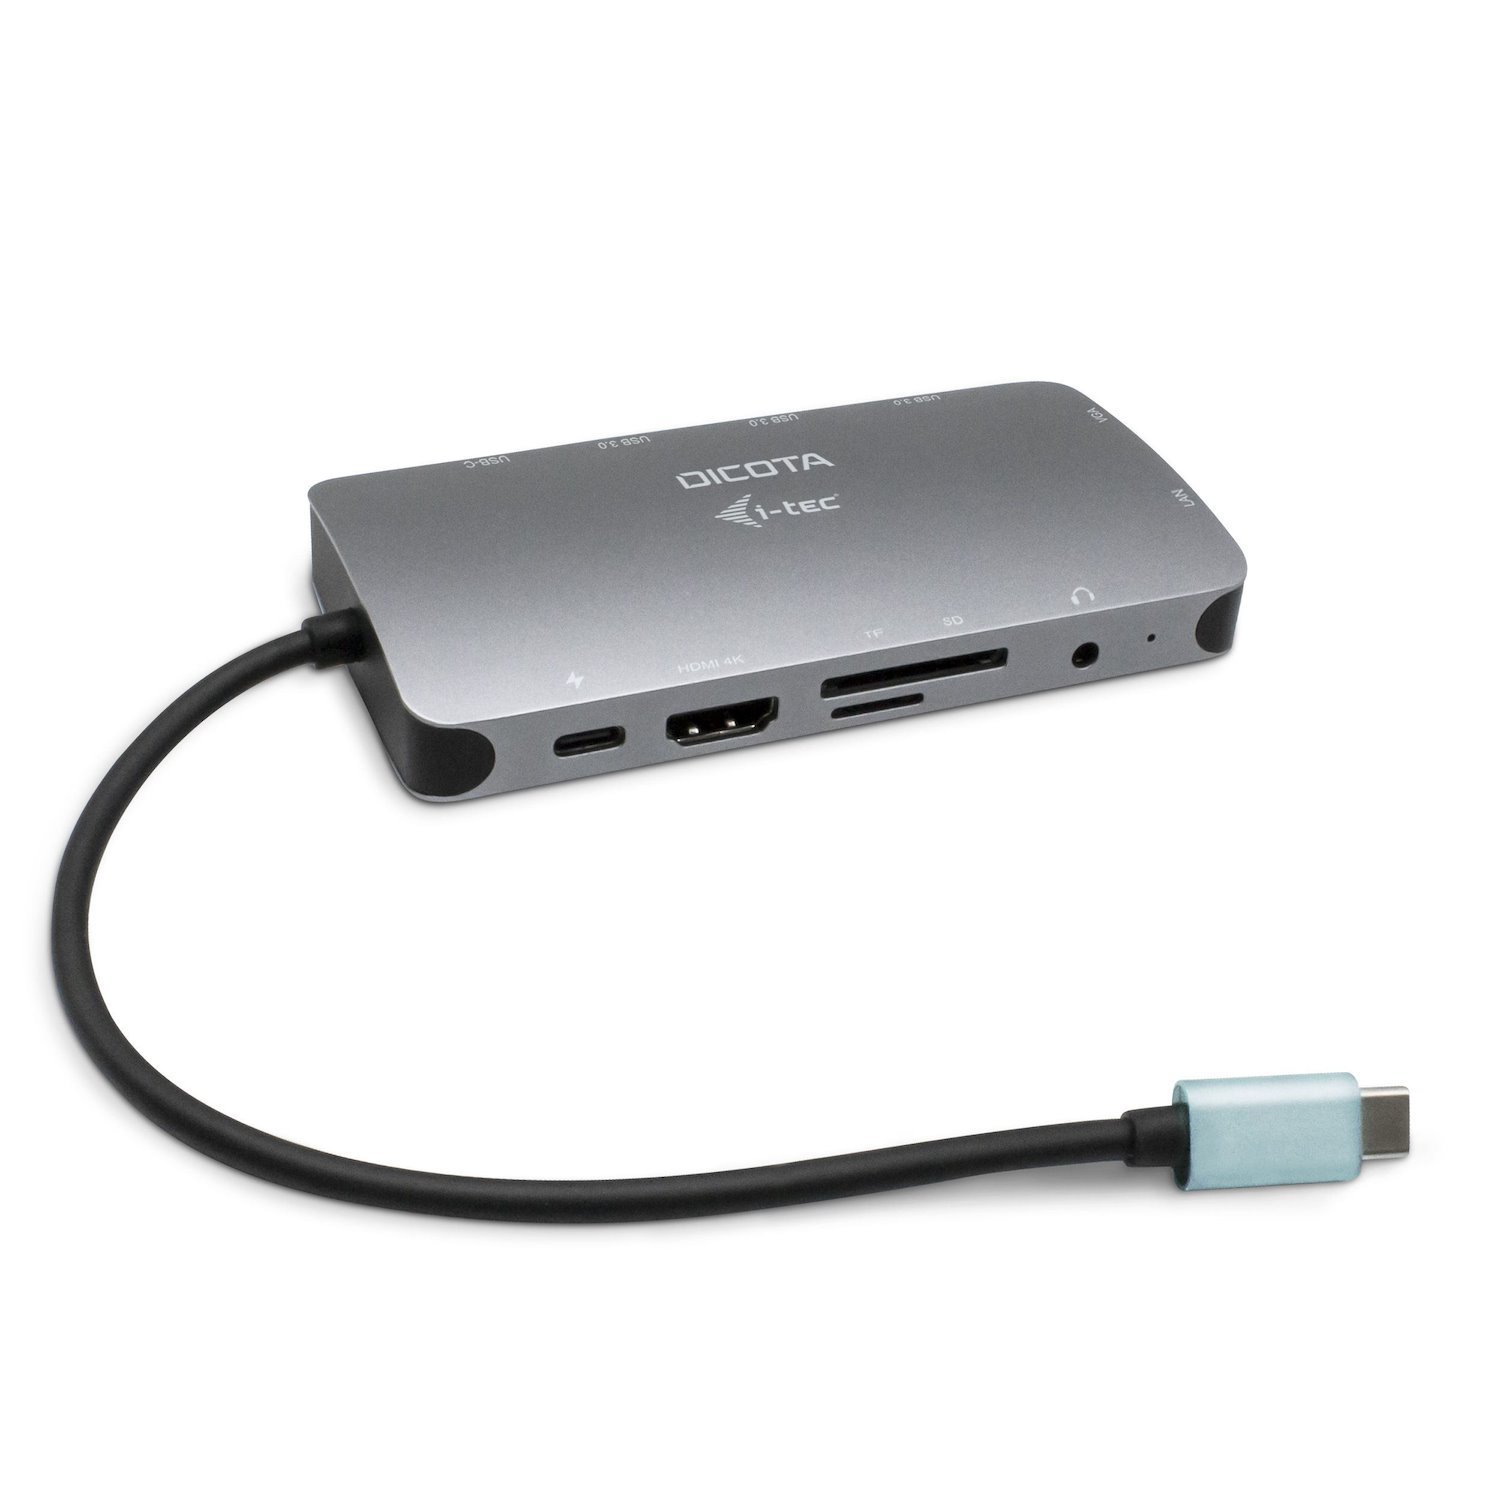 Dicota D31955 Notebook Dock/Port Replicator Wired Usb Type-C Anthracite (Usb-C Portable 10-In-1 Docking - Station Hdmi/Pd 100W)